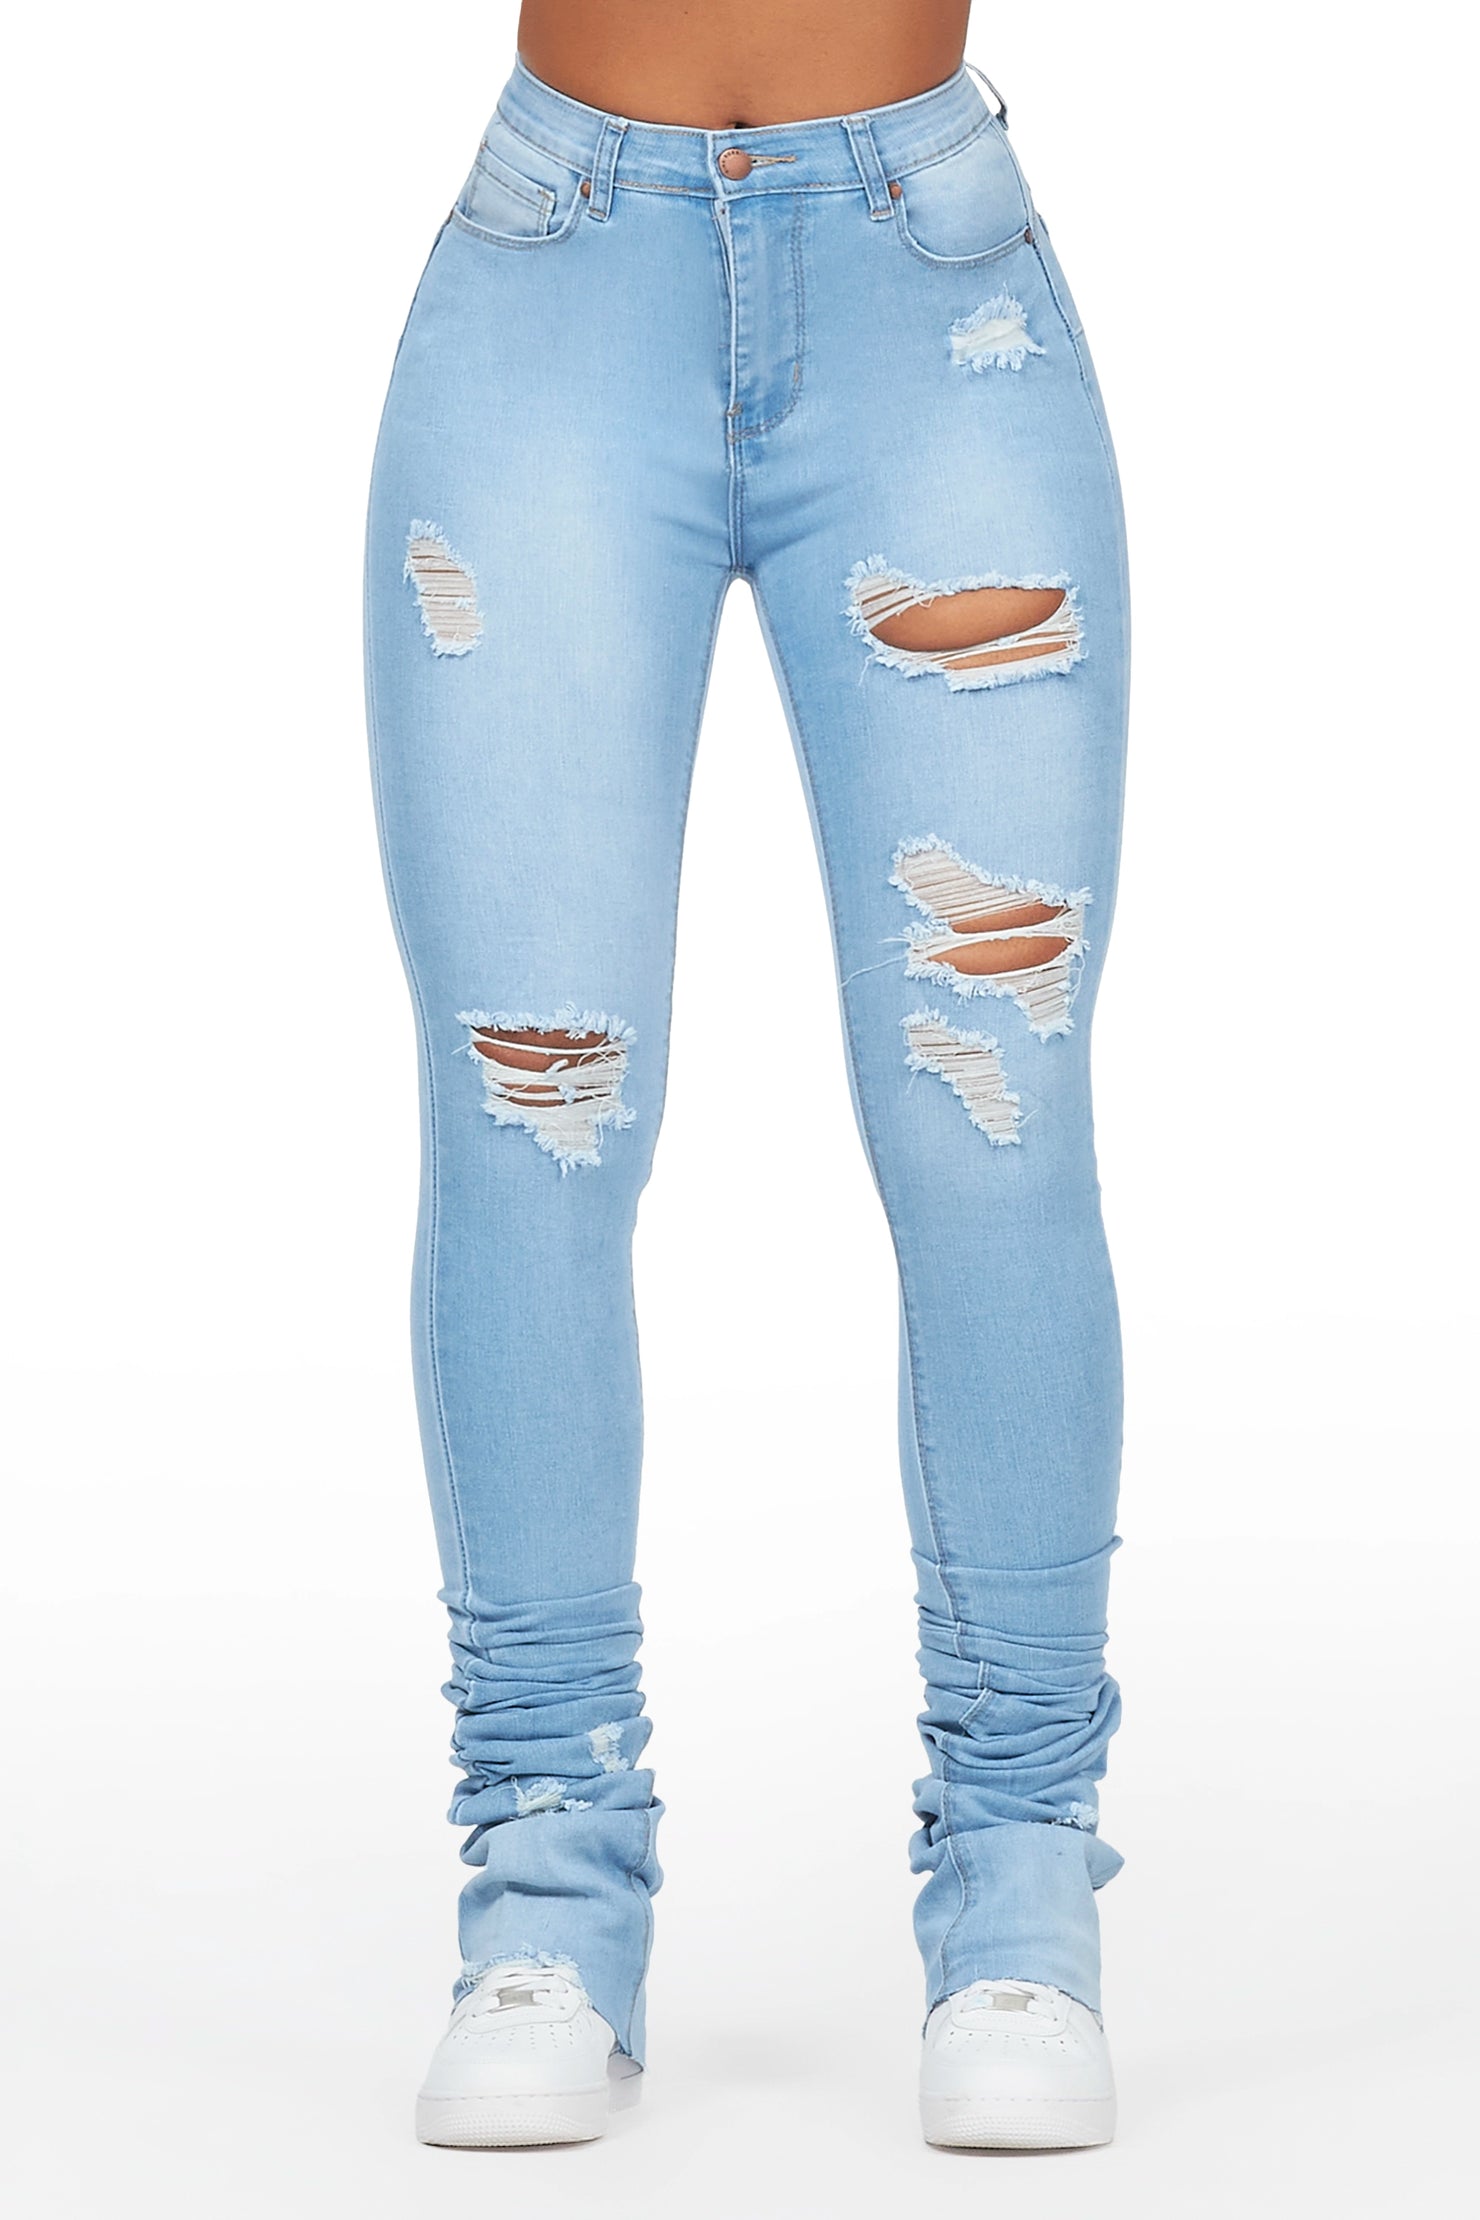 Timekia Light Wash Distressed Super Stacked Jean